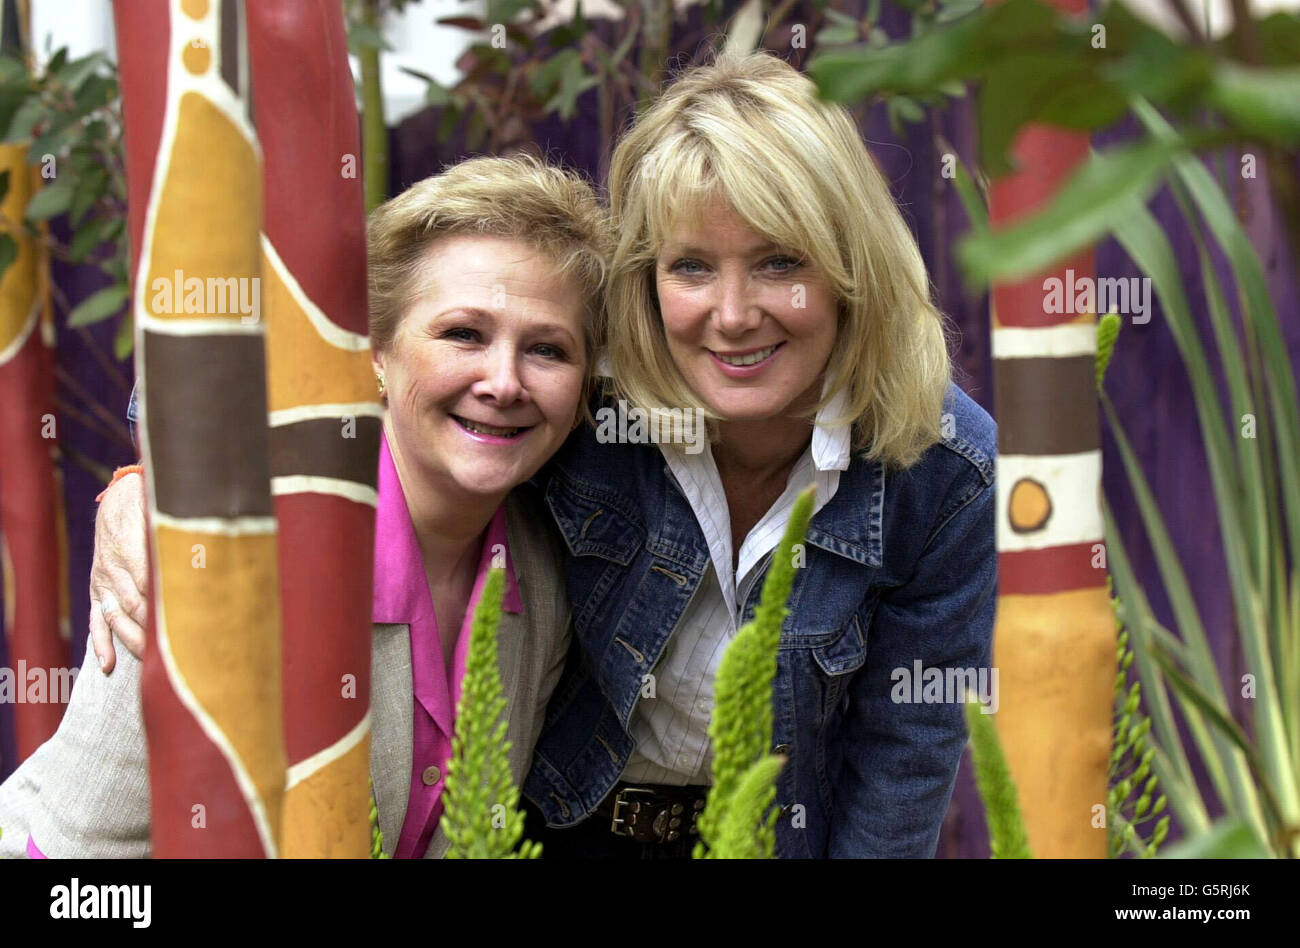 TV's 'Bad Girls' actors, Kika Mirylees (right) and Isabelle Amyes, enjoy the 'Kelly's Creek', Australian garden at Chelsea Flower Show, London. Stock Photo